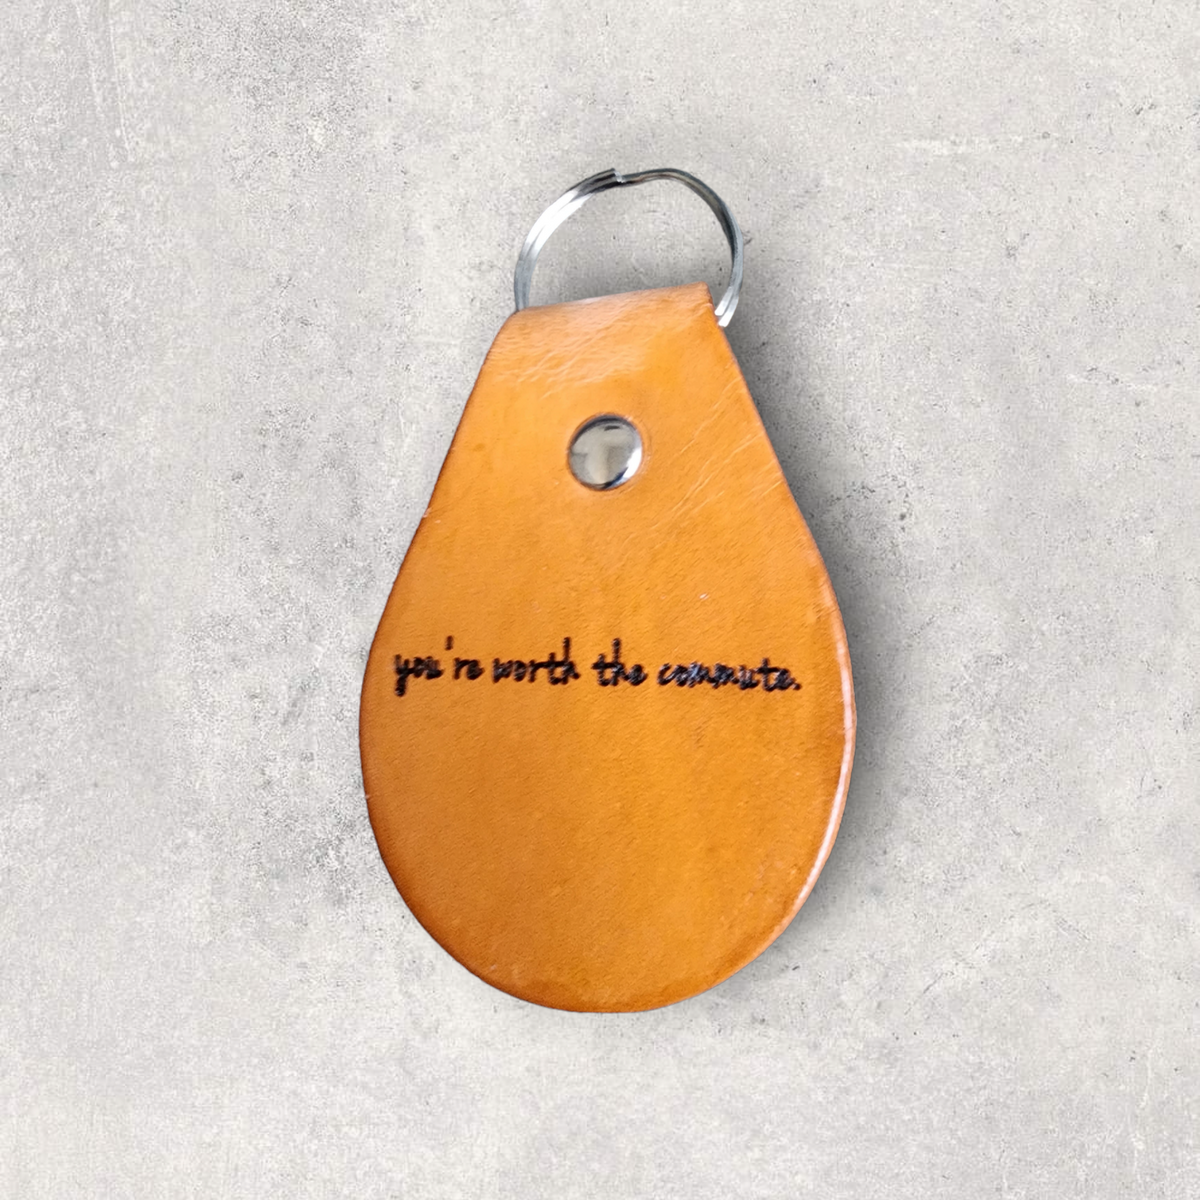 Engraved Leather Keychain - you're worth the commute